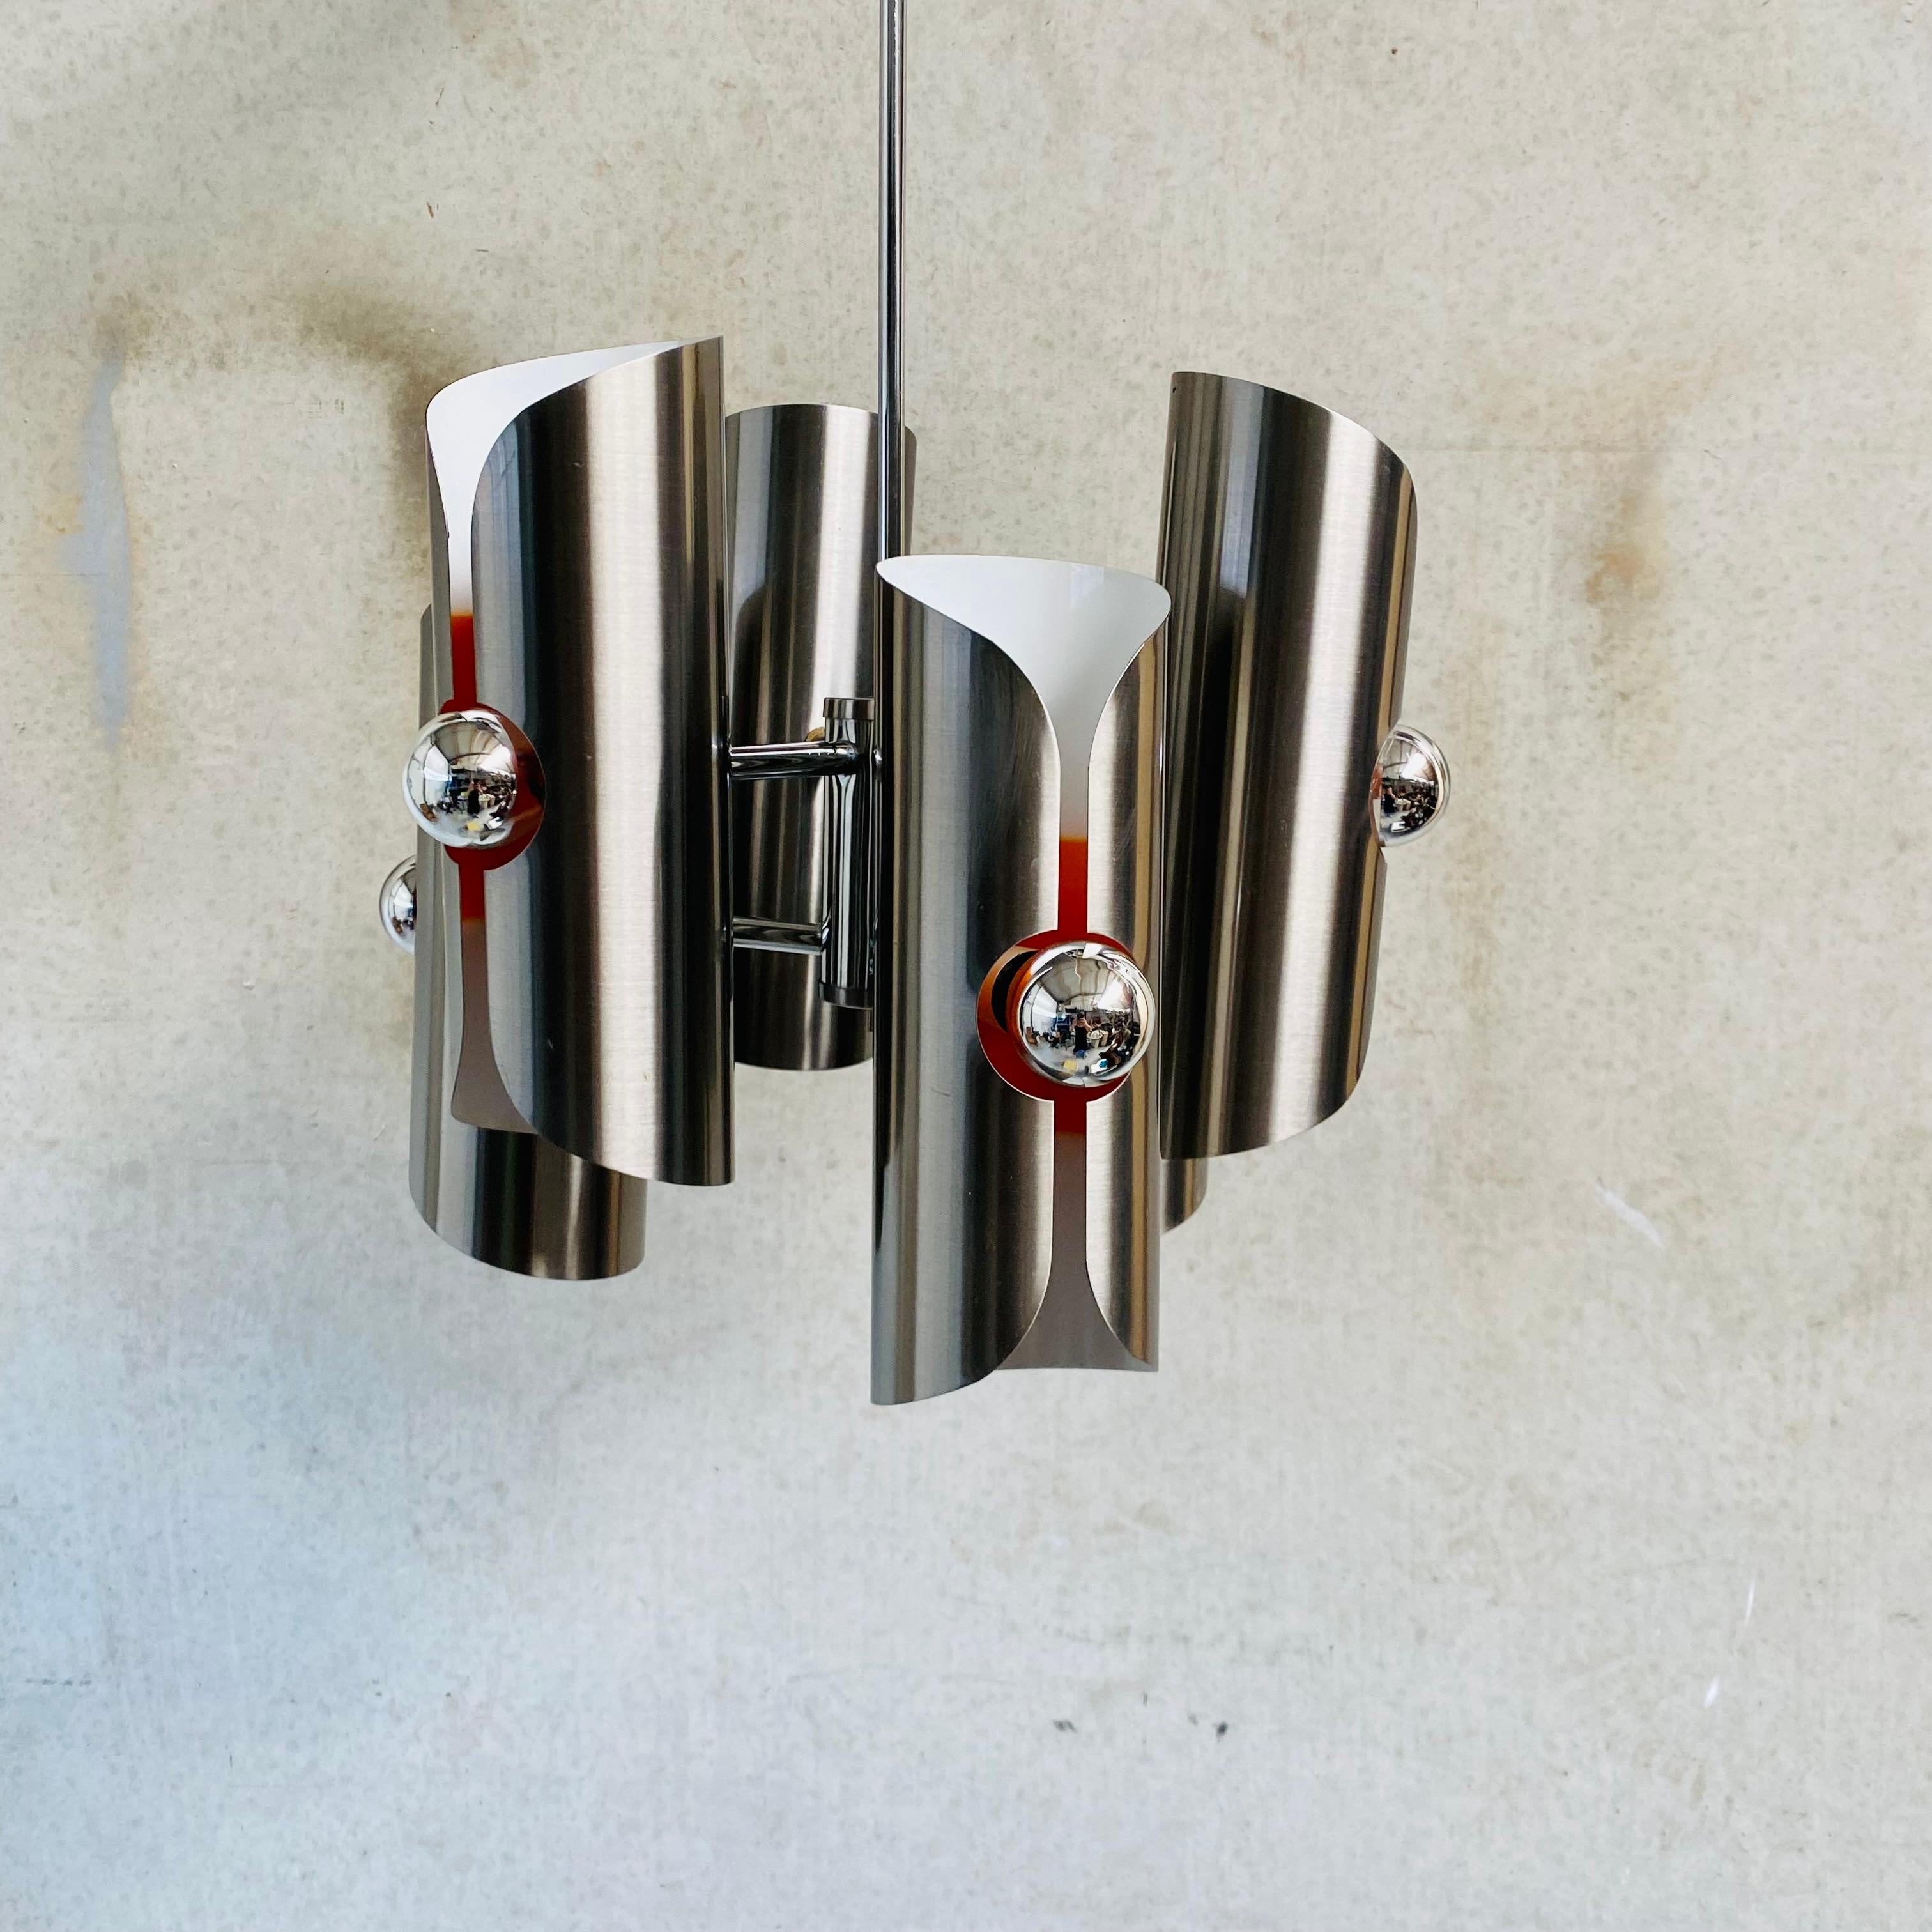 Mid-Century Stainless Steel Space Age Chandelier by Polam, Poland 1970 For Sale 4